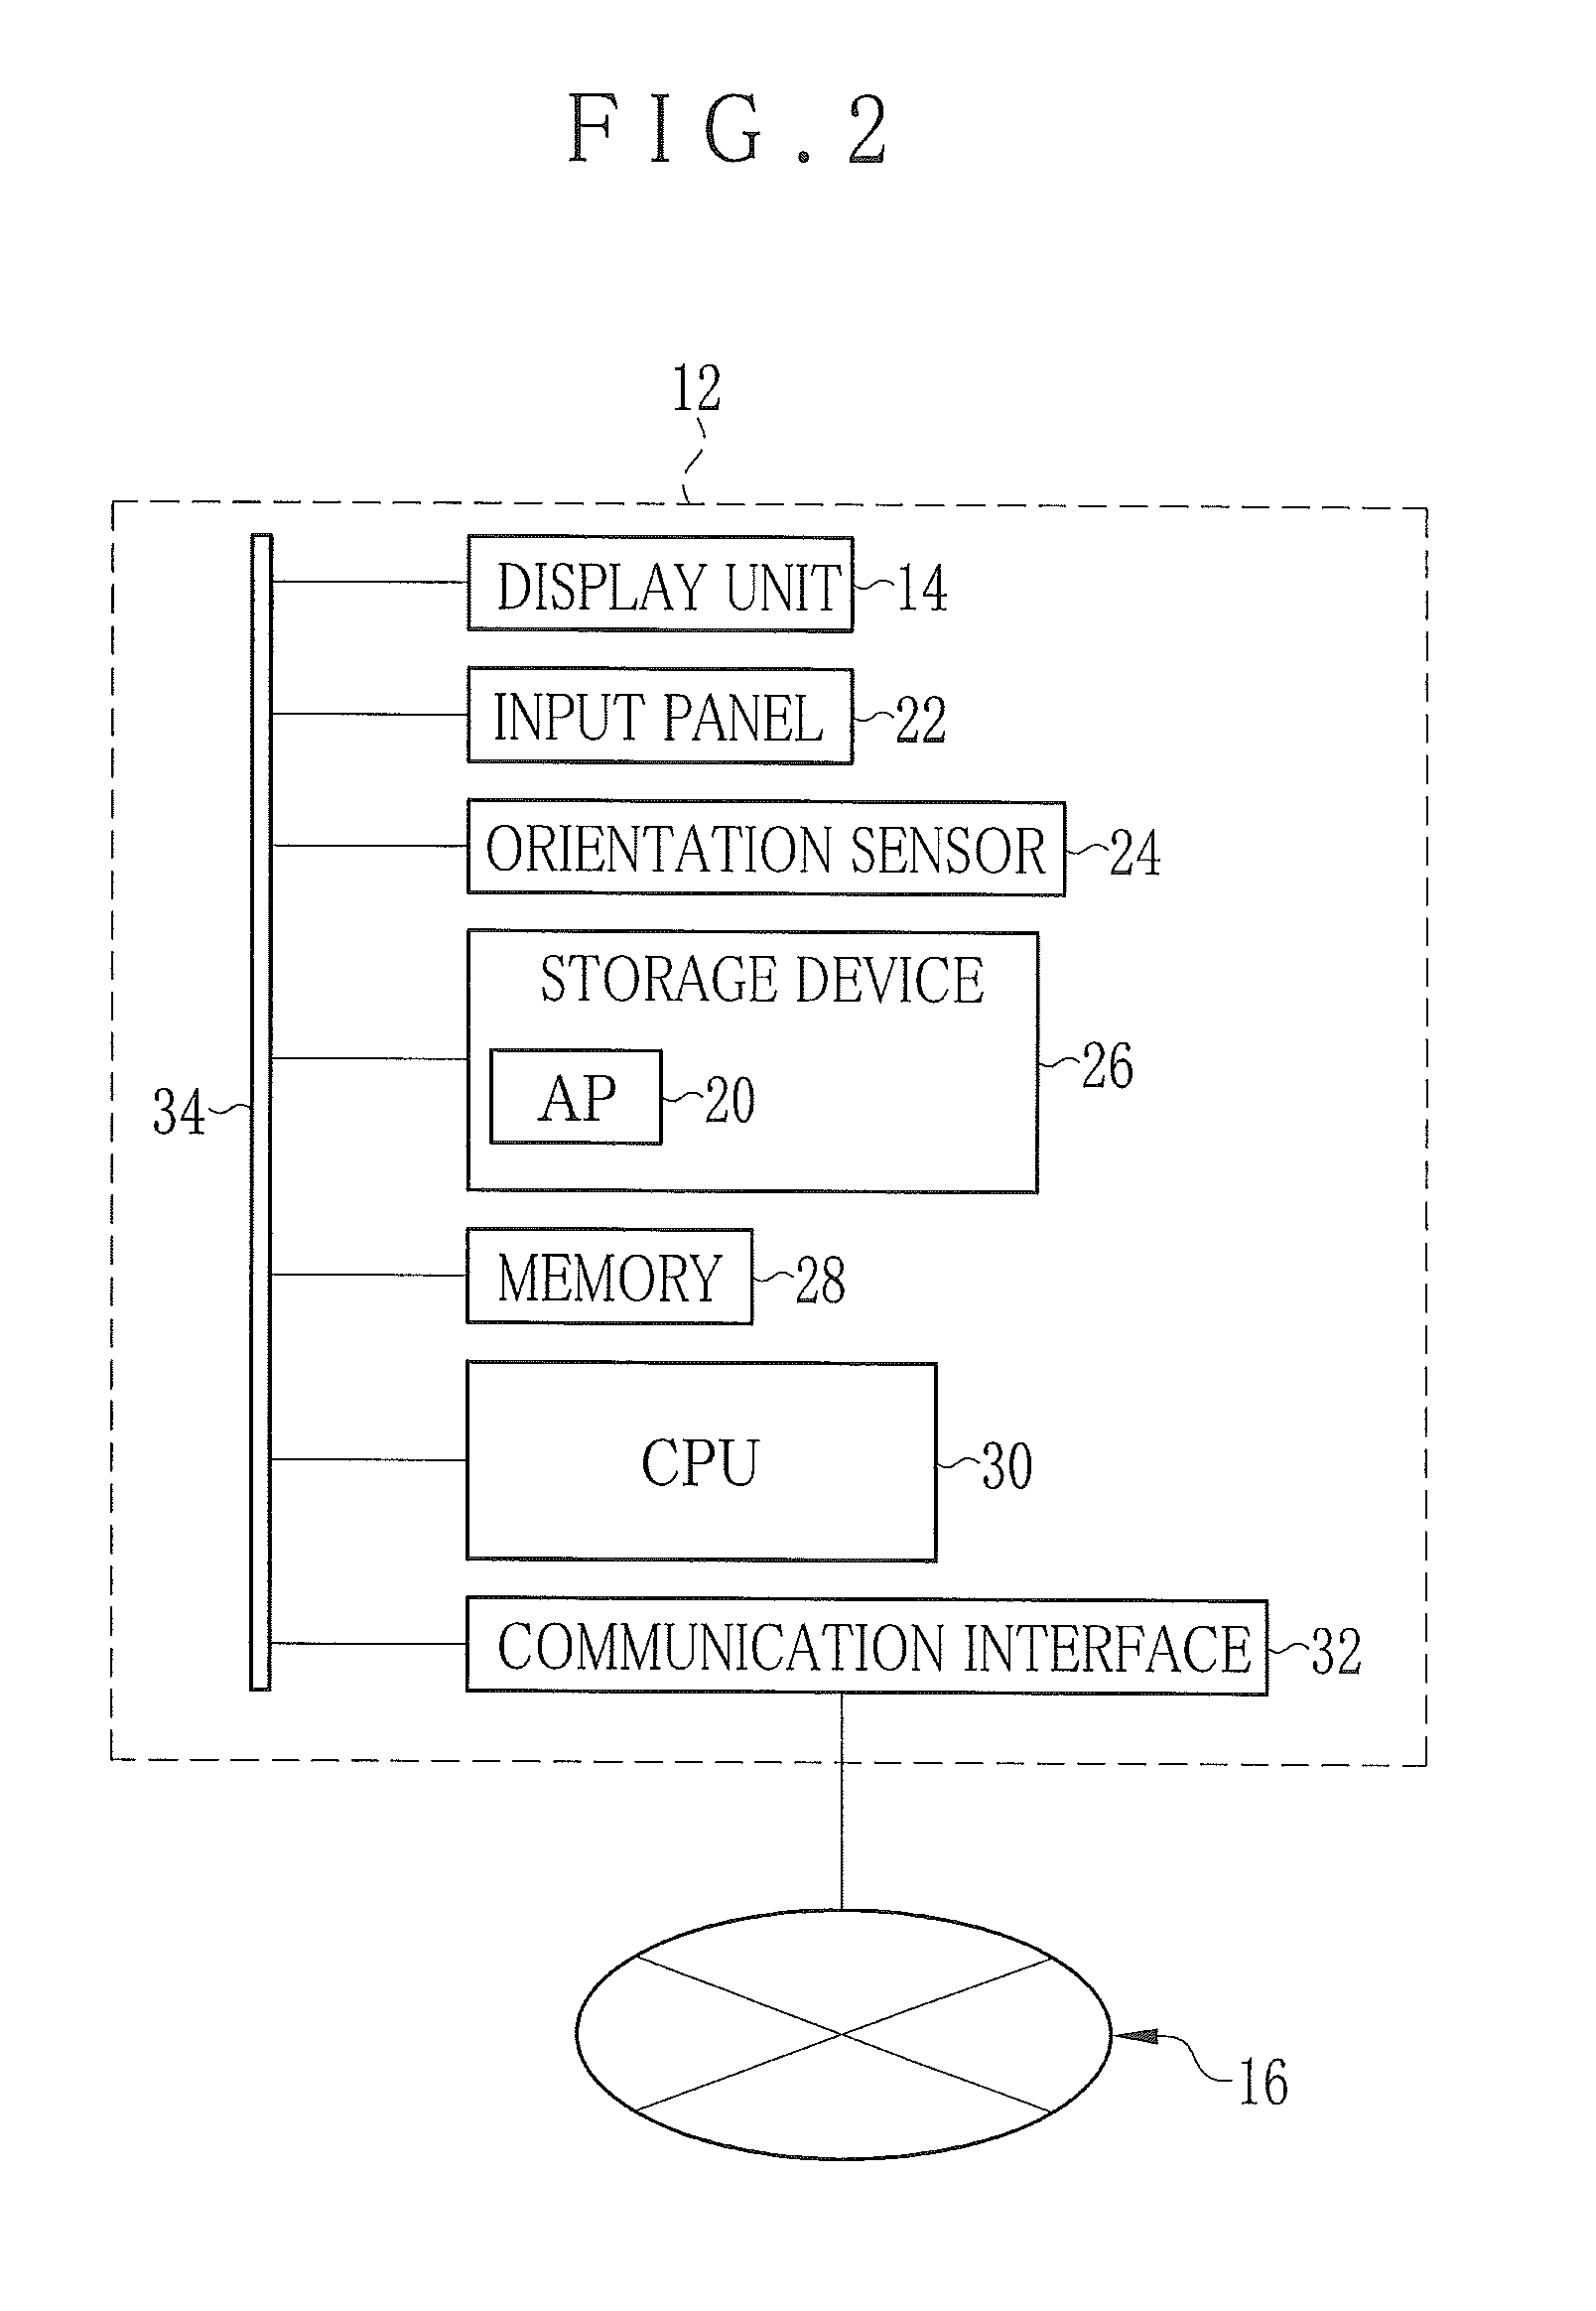 Mobile terminal apparatus with display unit